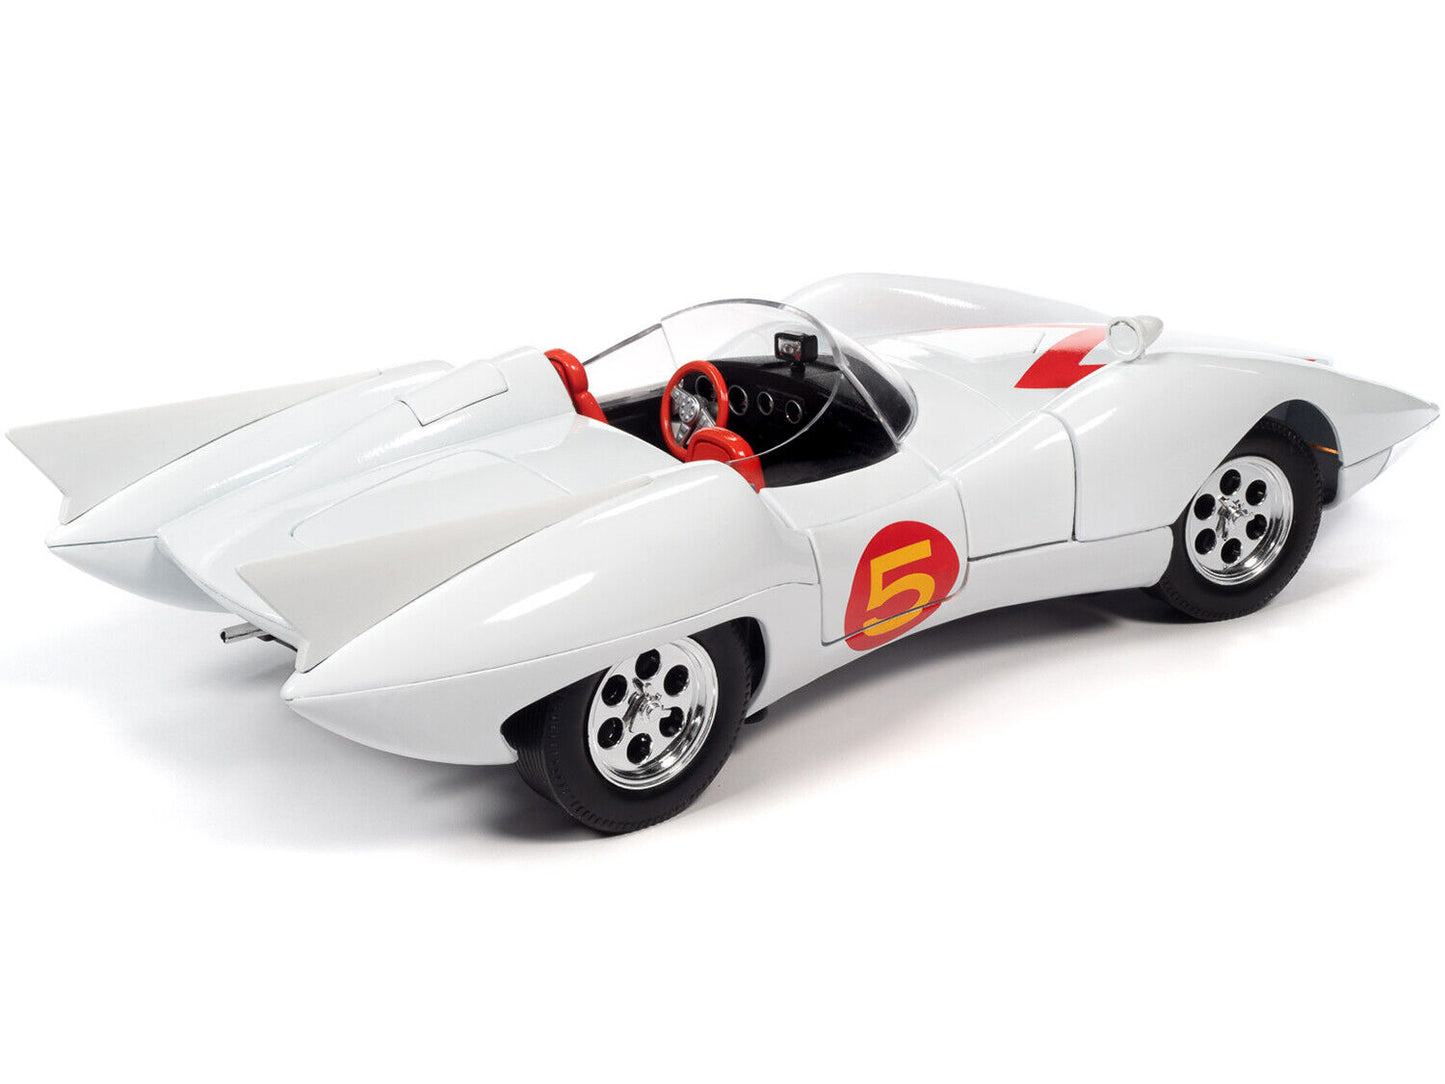 Mach 5 Five White with Chim-Chim Monkey and Speed Racer Figurines 1/18 Diecast Model Car by Auto World